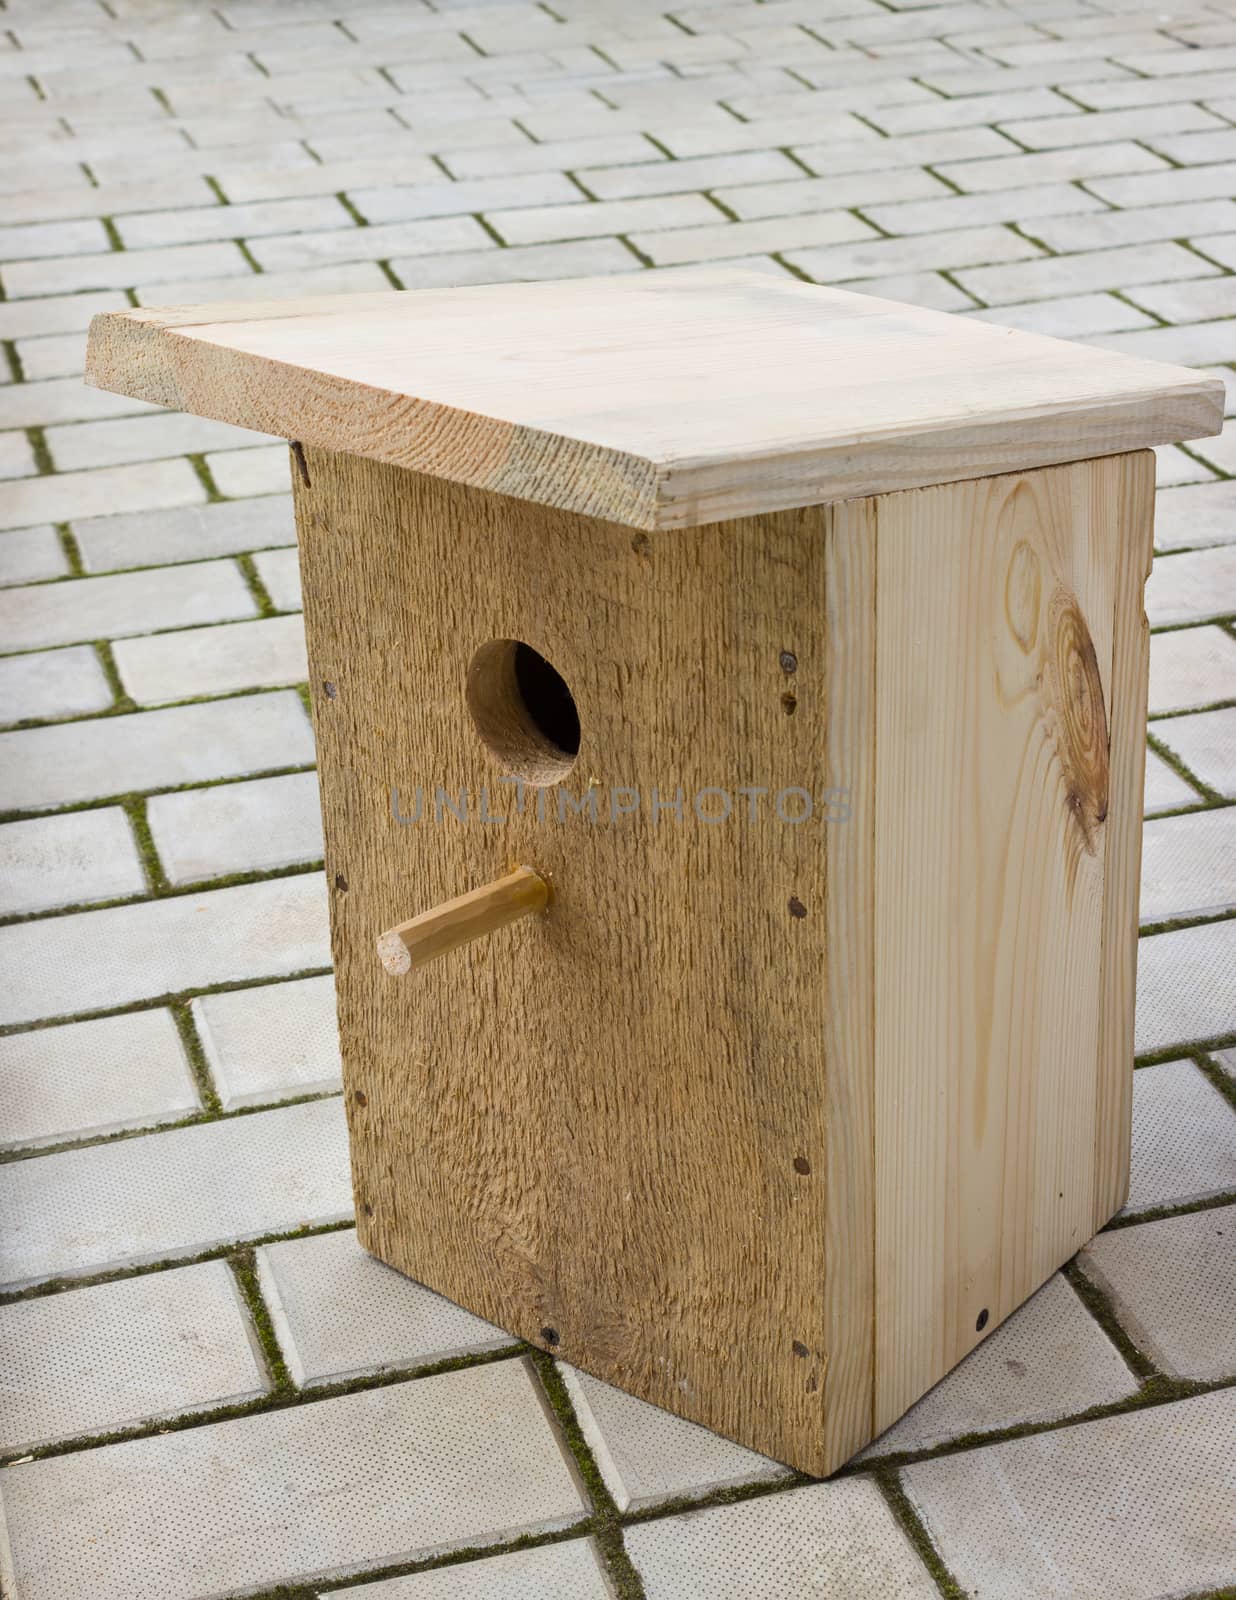 Small birdhouse from wooden planks on the floor